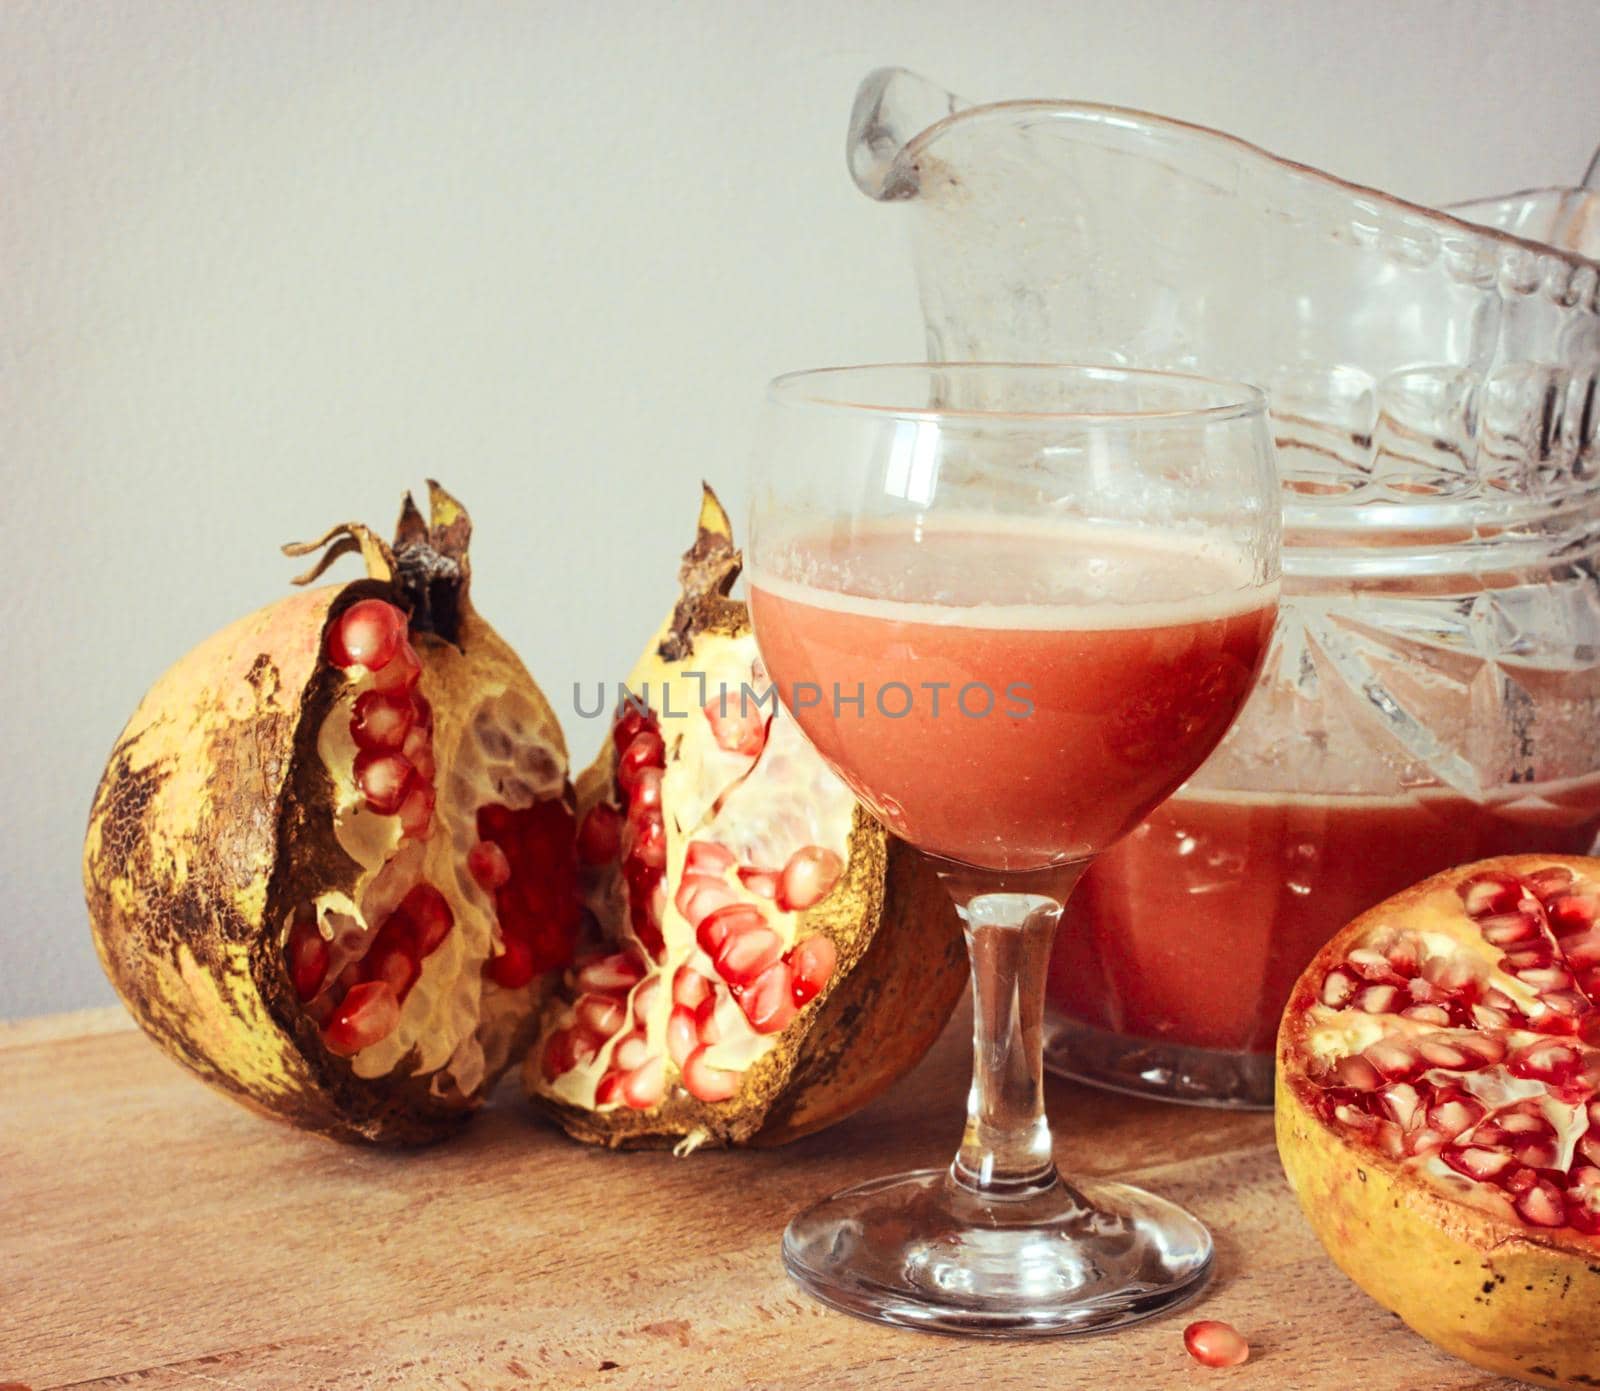 Fresh pomegranate juice in a glass jug with sliced pomegranates on a chopping board